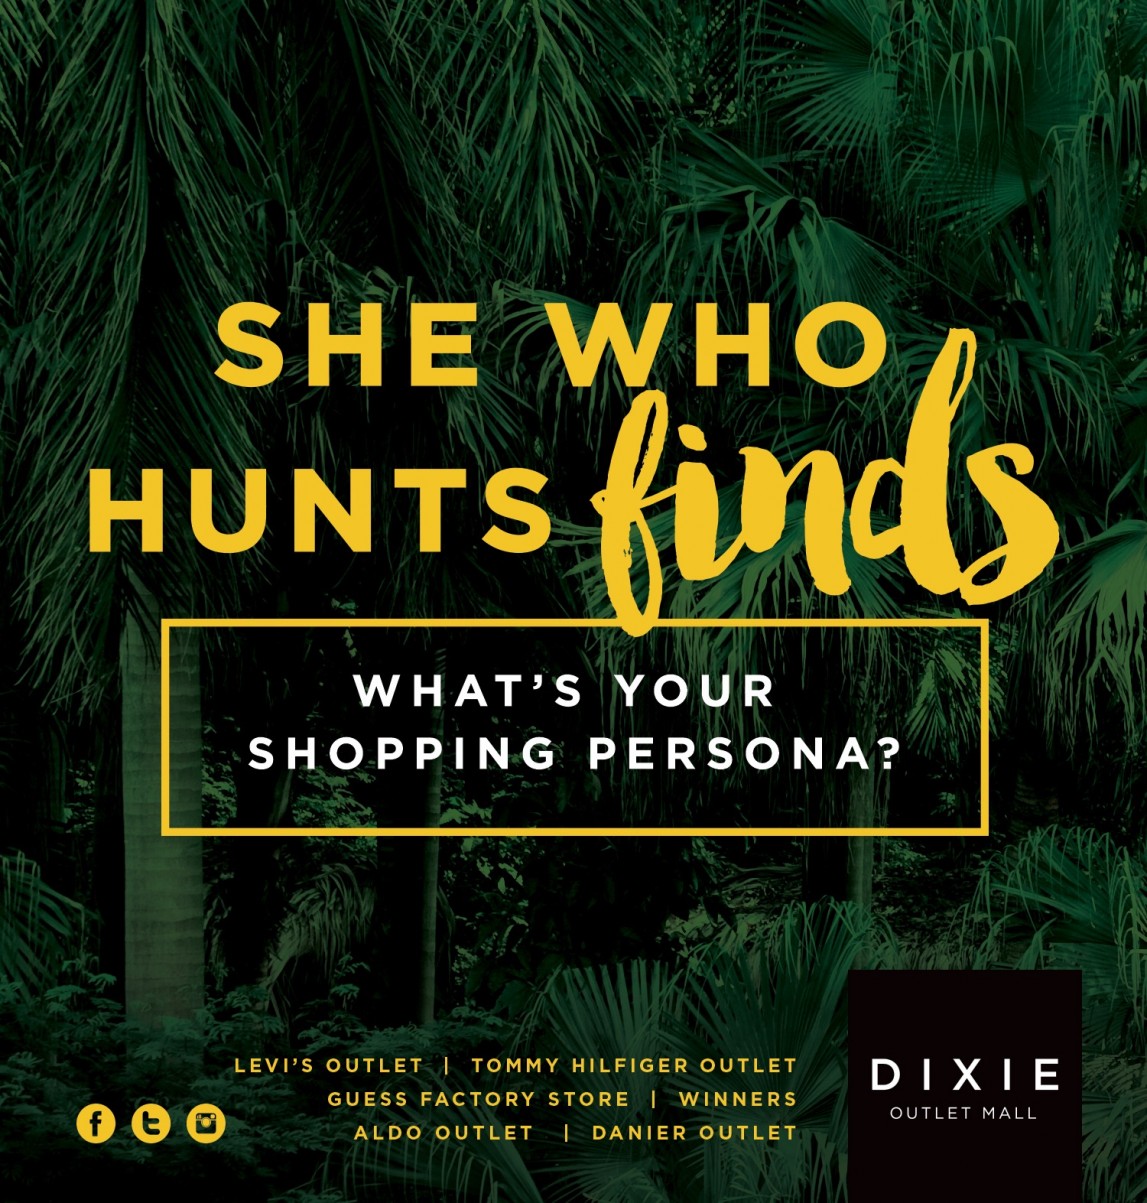 She who hunts finds